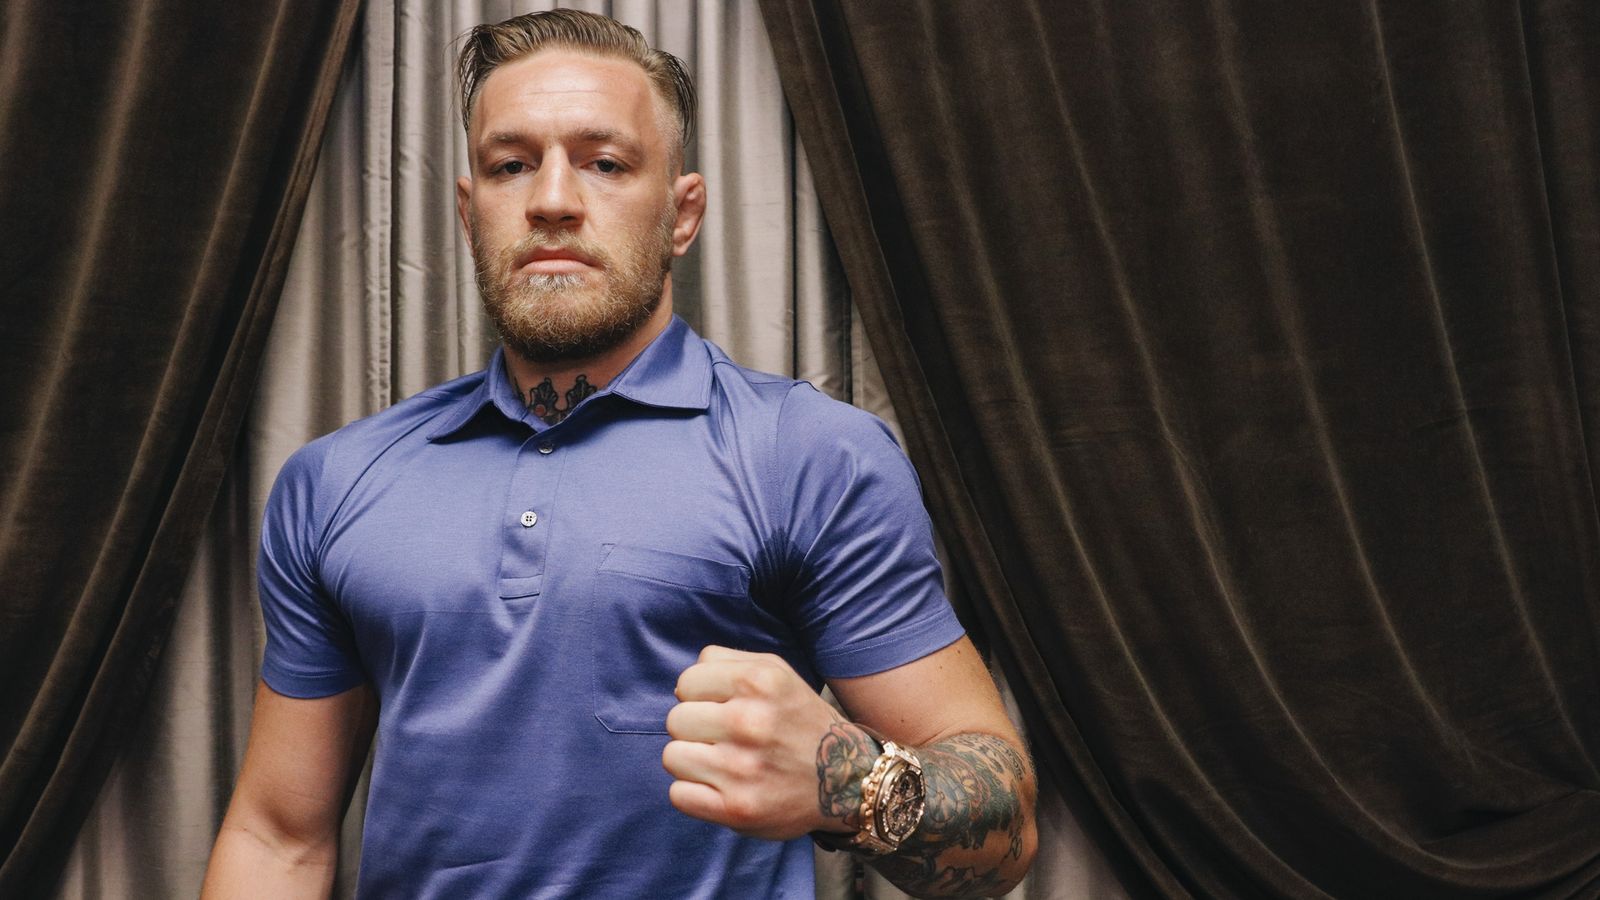 Conor McGregor HD Wallpapers Free Download in High Quality and Resolution1600 x 900